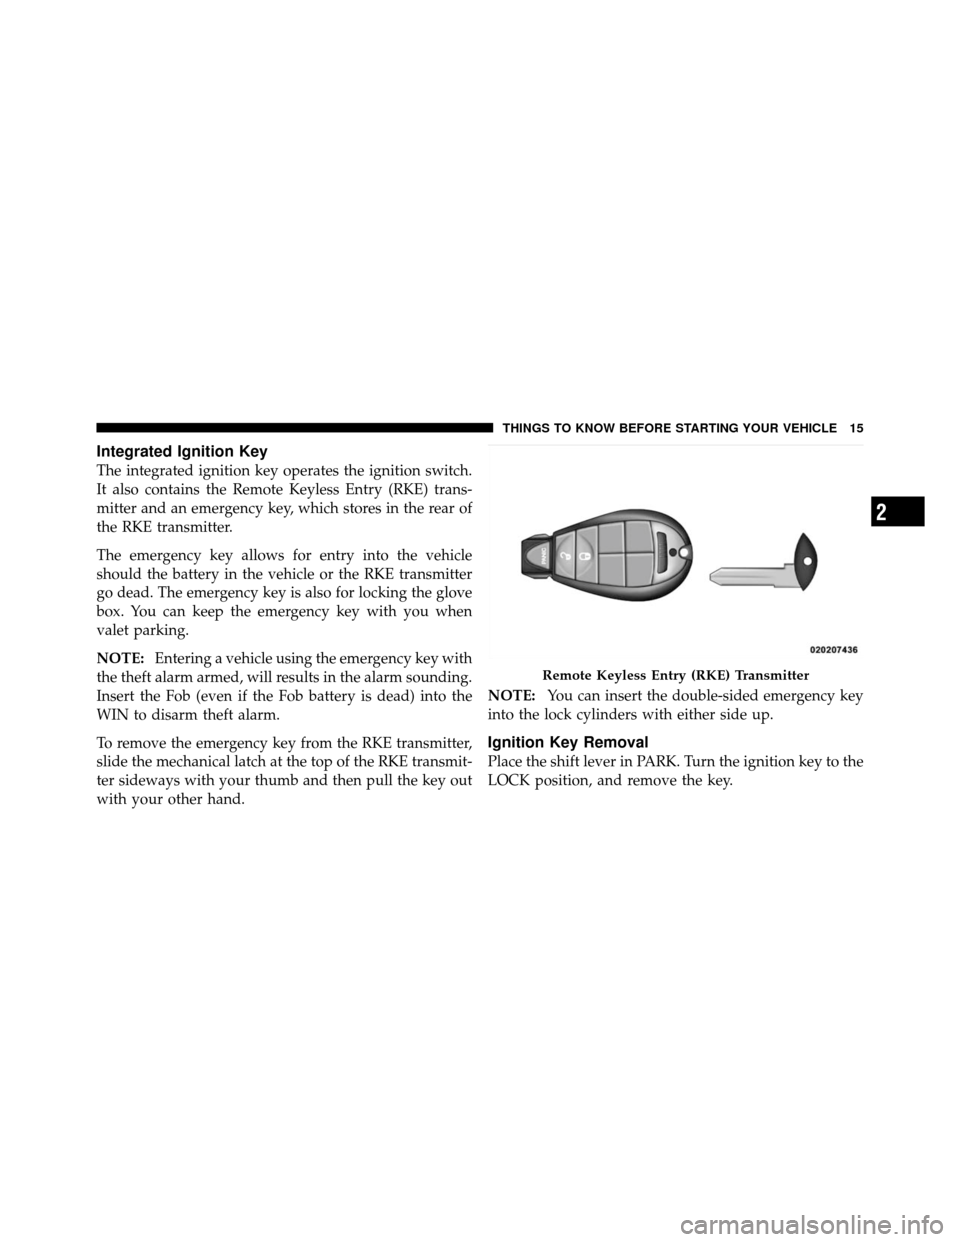 JEEP COMMANDER 2010 1.G User Guide Integrated Ignition Key
The integrated ignition key operates the ignition switch.
It also contains the Remote Keyless Entry (RKE) trans-
mitter and an emergency key, which stores in the rear of
the RK